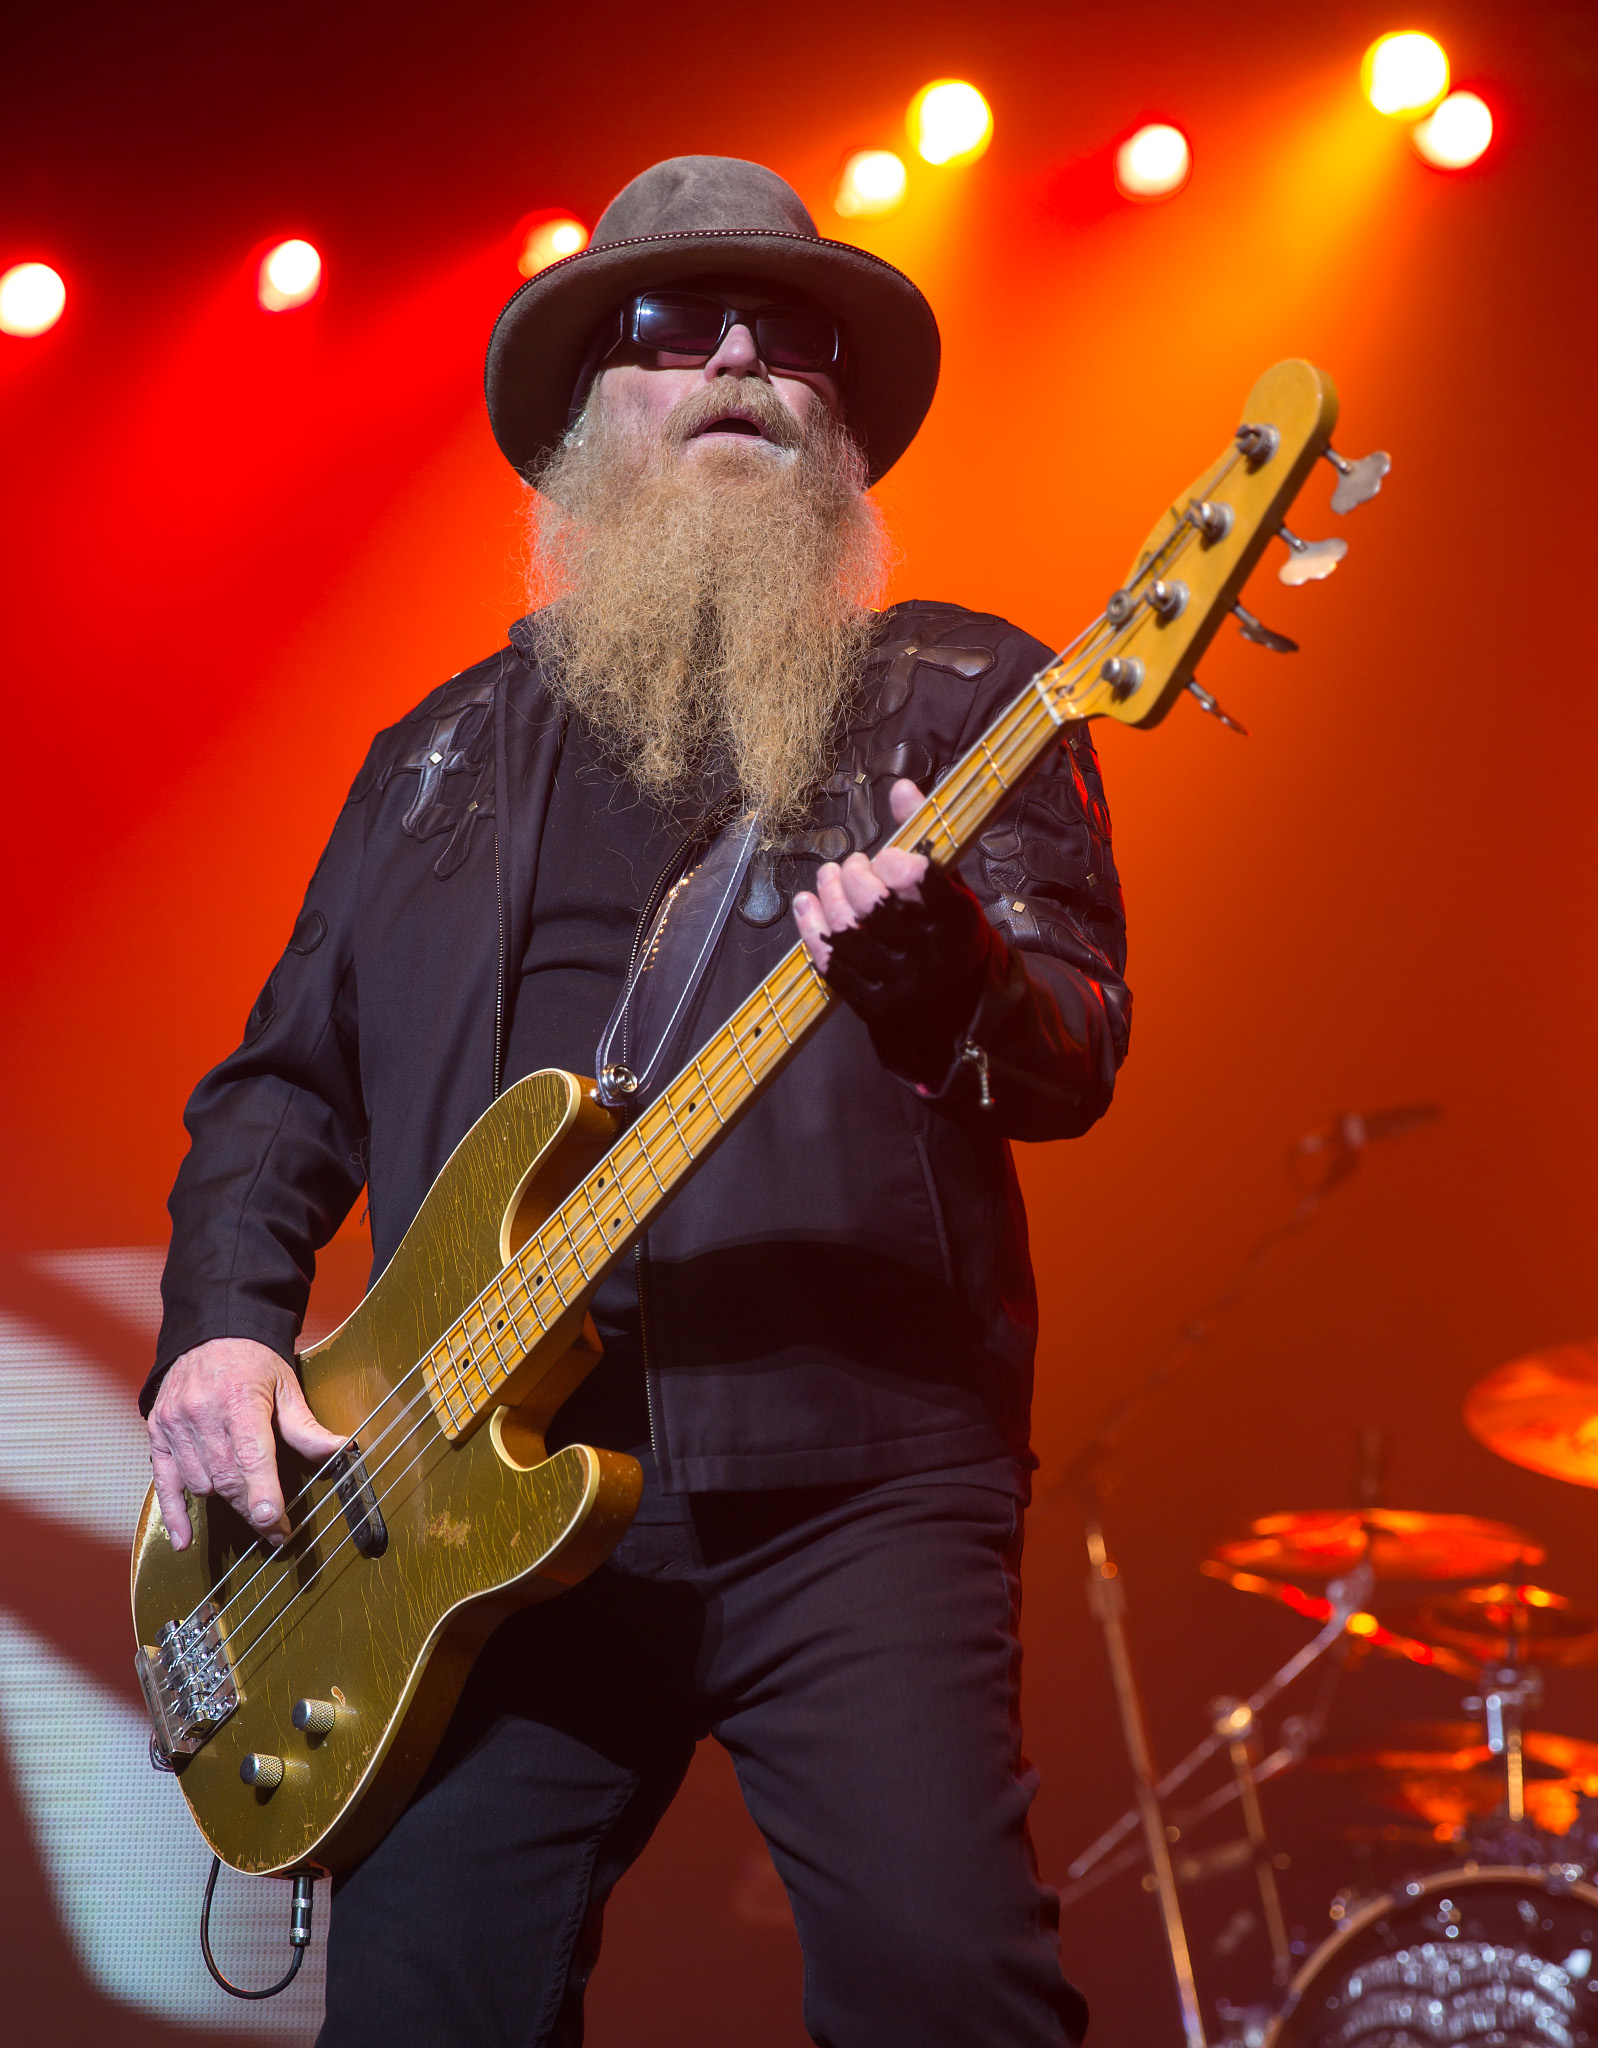 https://upload.wikimedia.org/wikipedia/commons/0/0a/Dusty_Hill_of_ZZ_Top_performing_in_San_Antonio%2C_Texas_2015.jpg